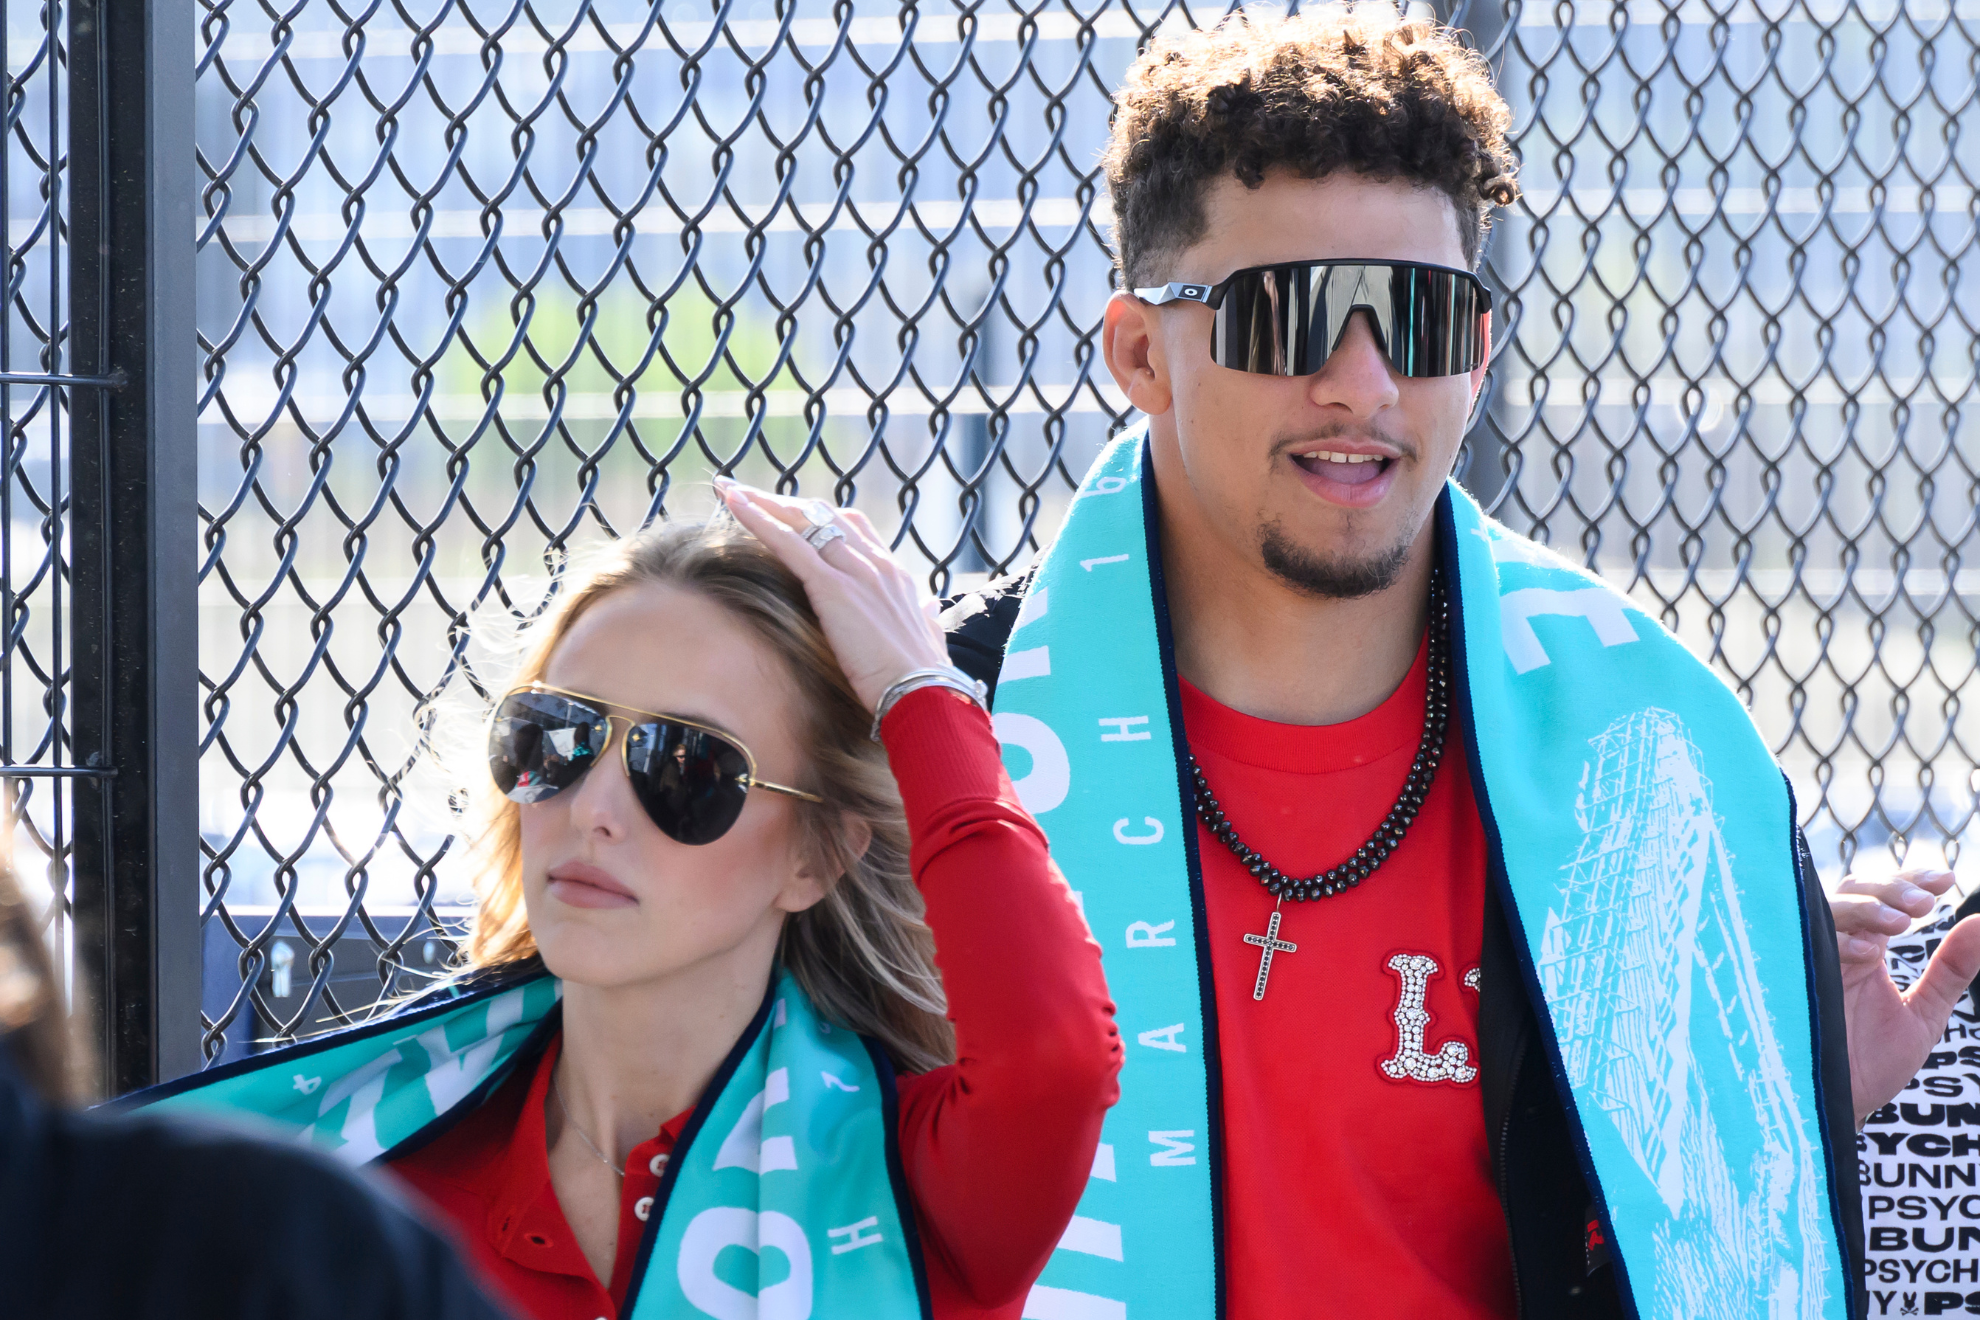 Brittany and Patrick Mahomes have invested in Kansas Citys soccer clubs.